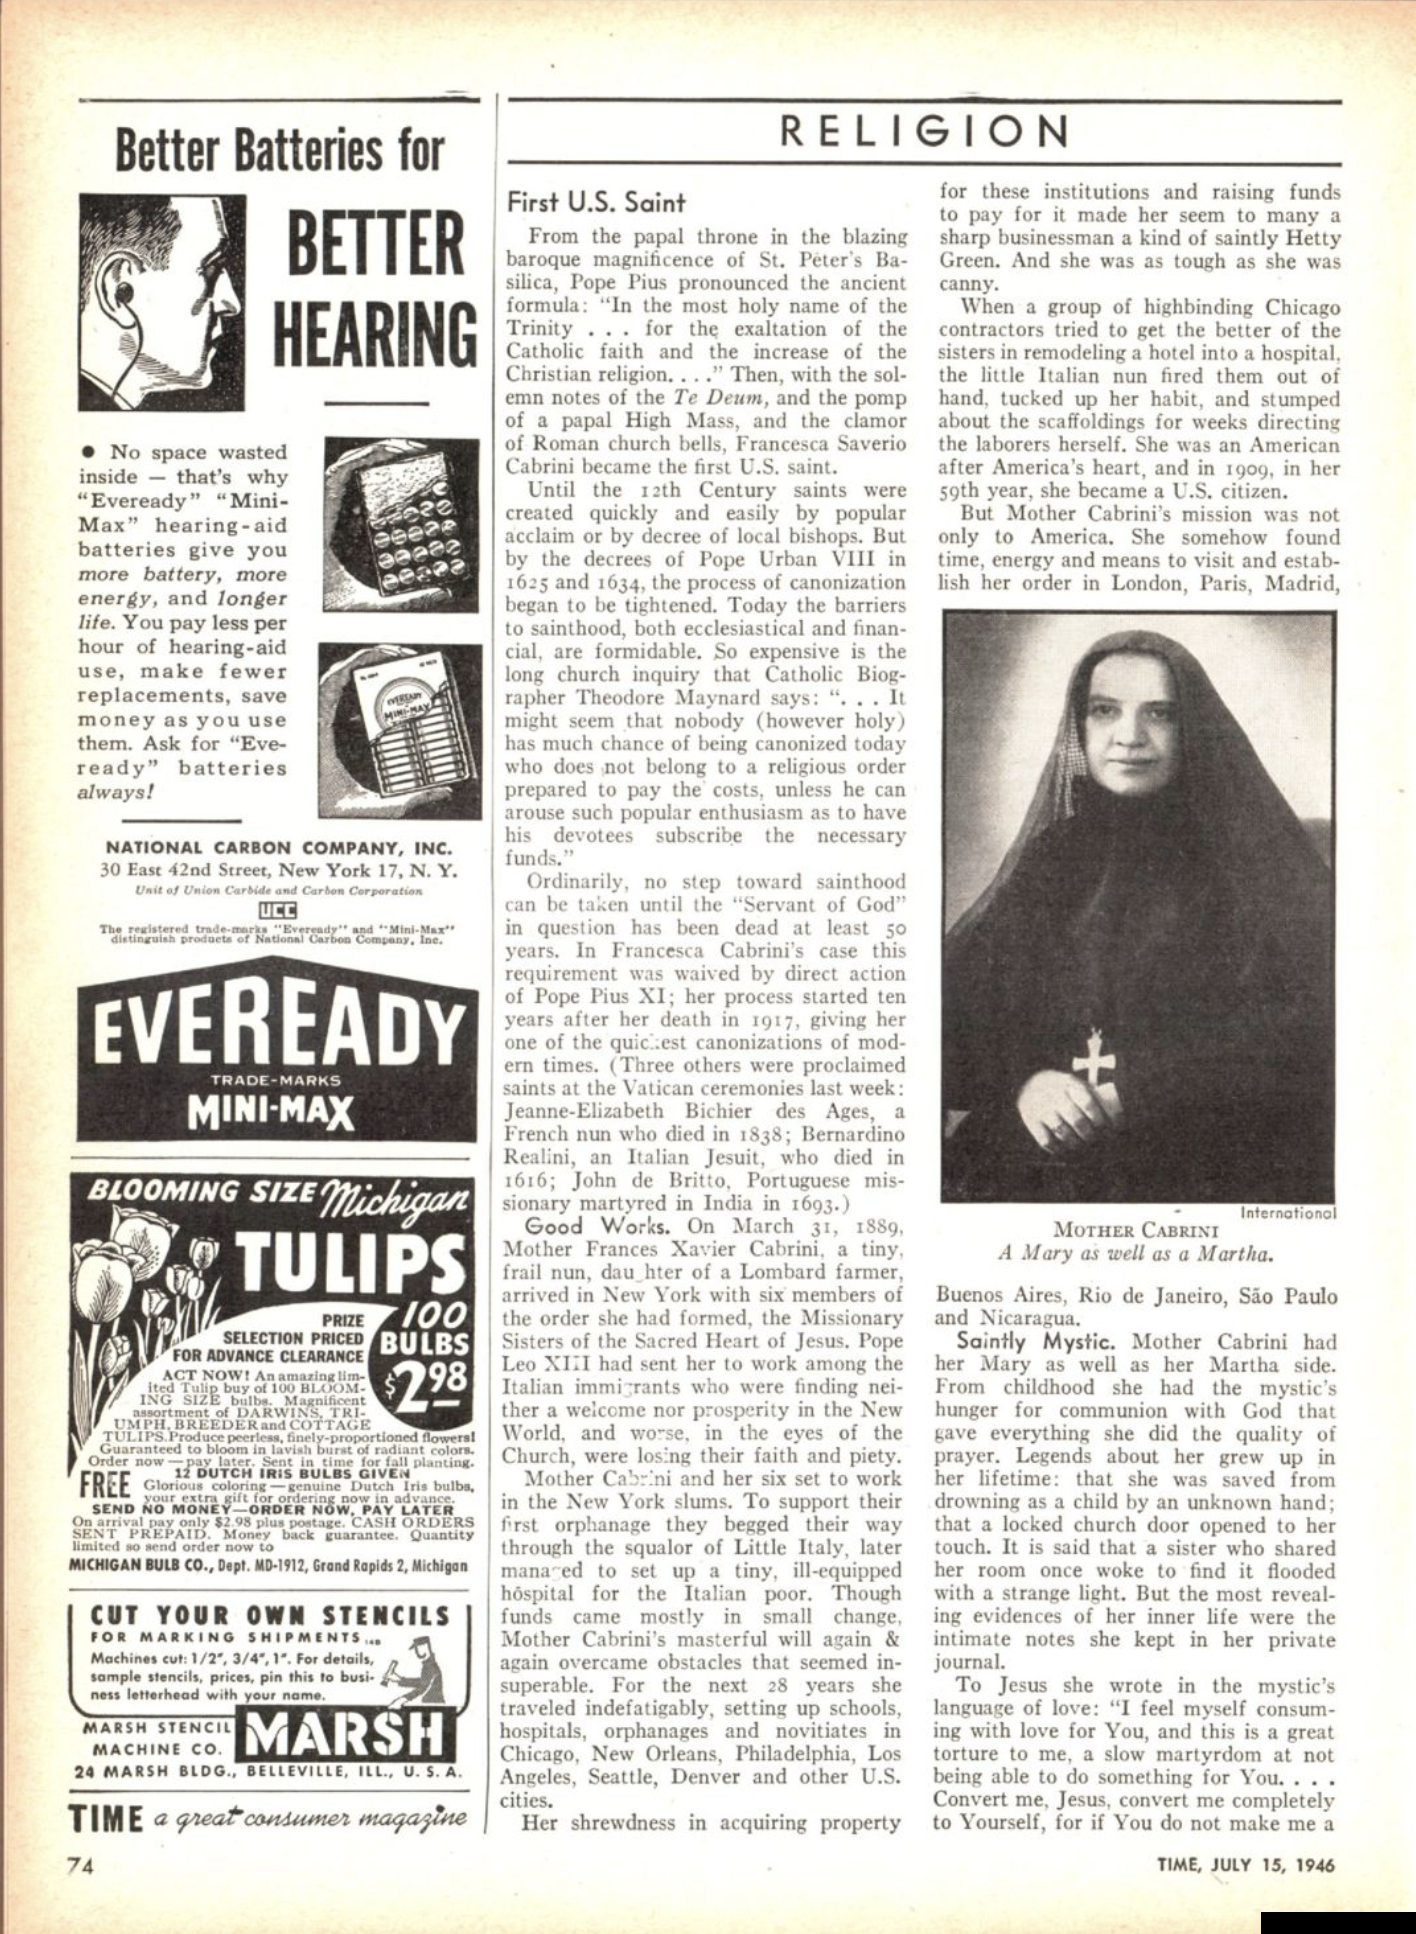 The first page of a two-page article that tells how Mother Cabrini became a saint.